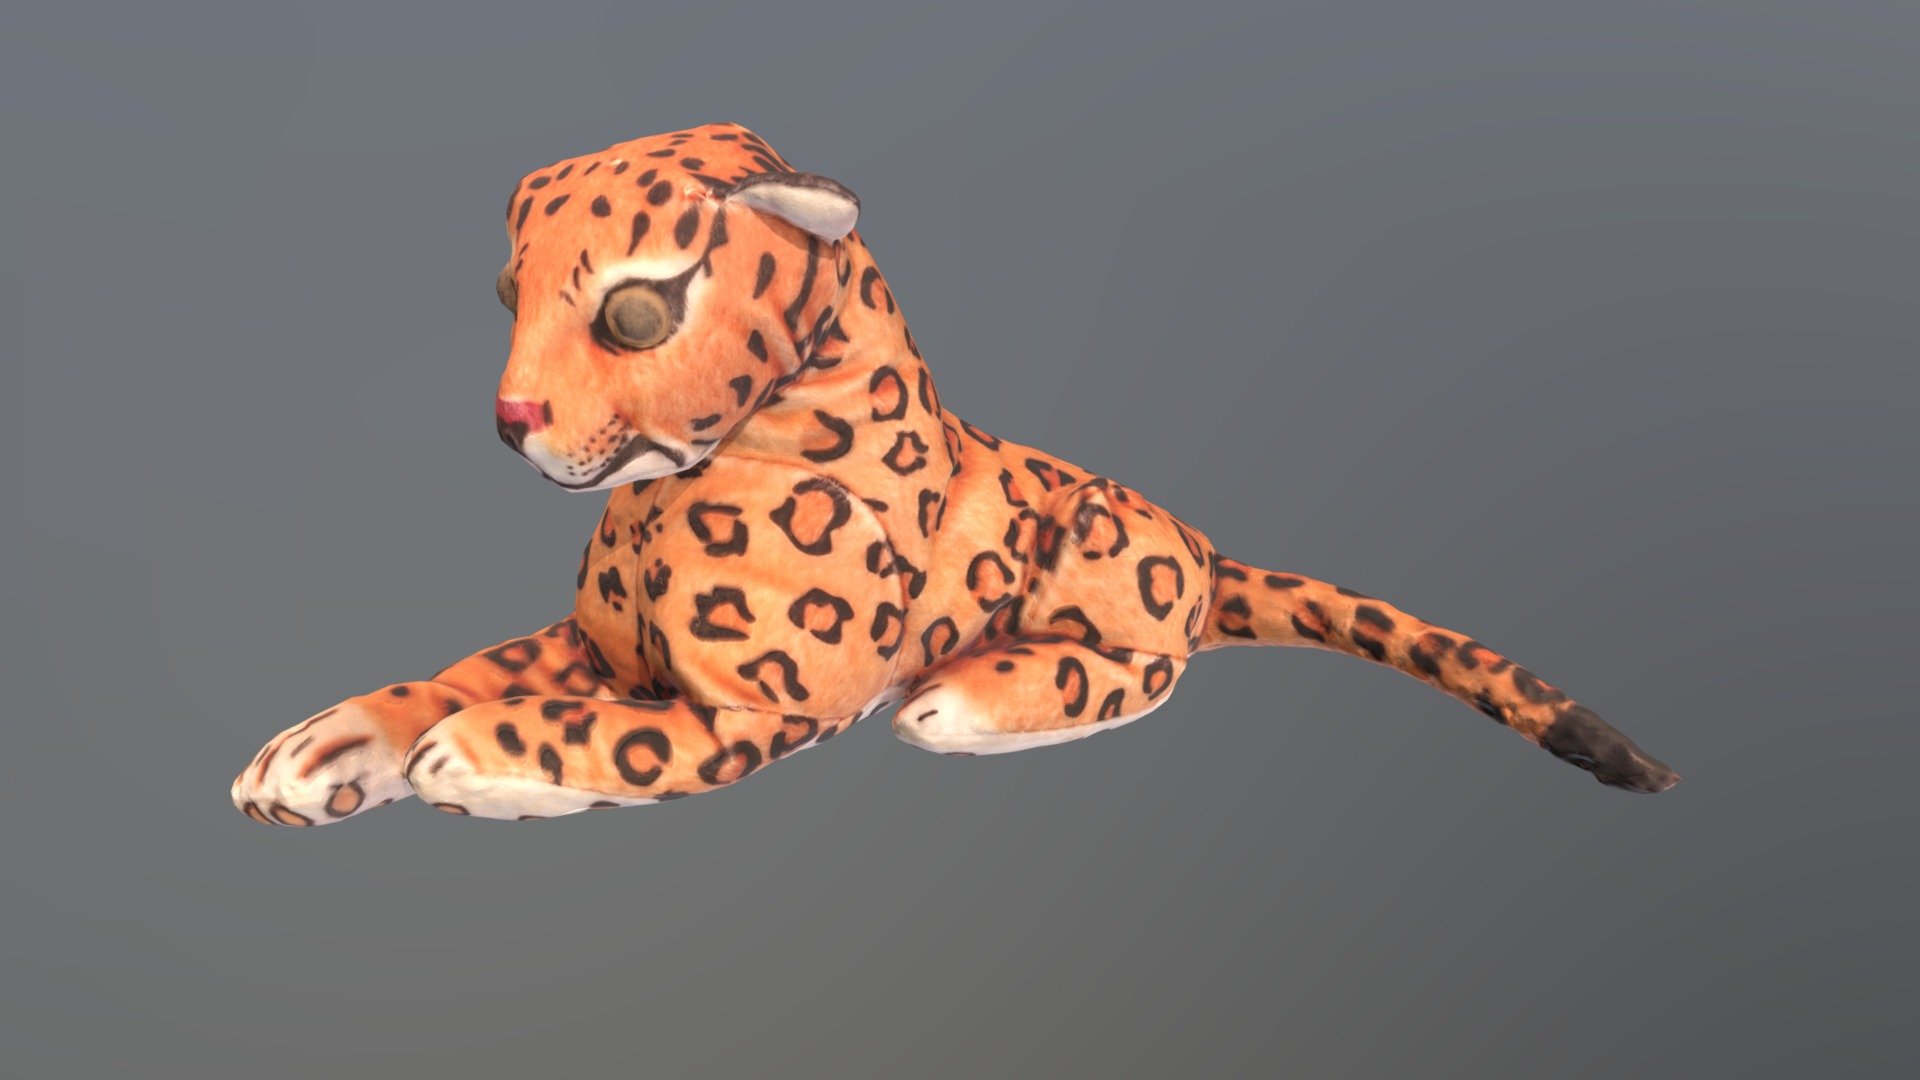 This is a 3d scanned jaguar toy. Model has a high and a low poly version.

*Model details: *

High poly:




Faces: 249990

Triangles: 249990

Vertices: 124973

Low poly:




Faces: 9918

Triangles: 9918

Vertices: 4957

Textures:




Diffuse map resolution: 4096 x 4096

Normal map resolution: 4096 x 4096

Model dimensions: 33.3cm x 17.4cm x 16.1cm

Included 3D formats: .blend, .fbx, .obj - Jaguar Toy - Buy Royalty Free 3D model by LNTH 3d model